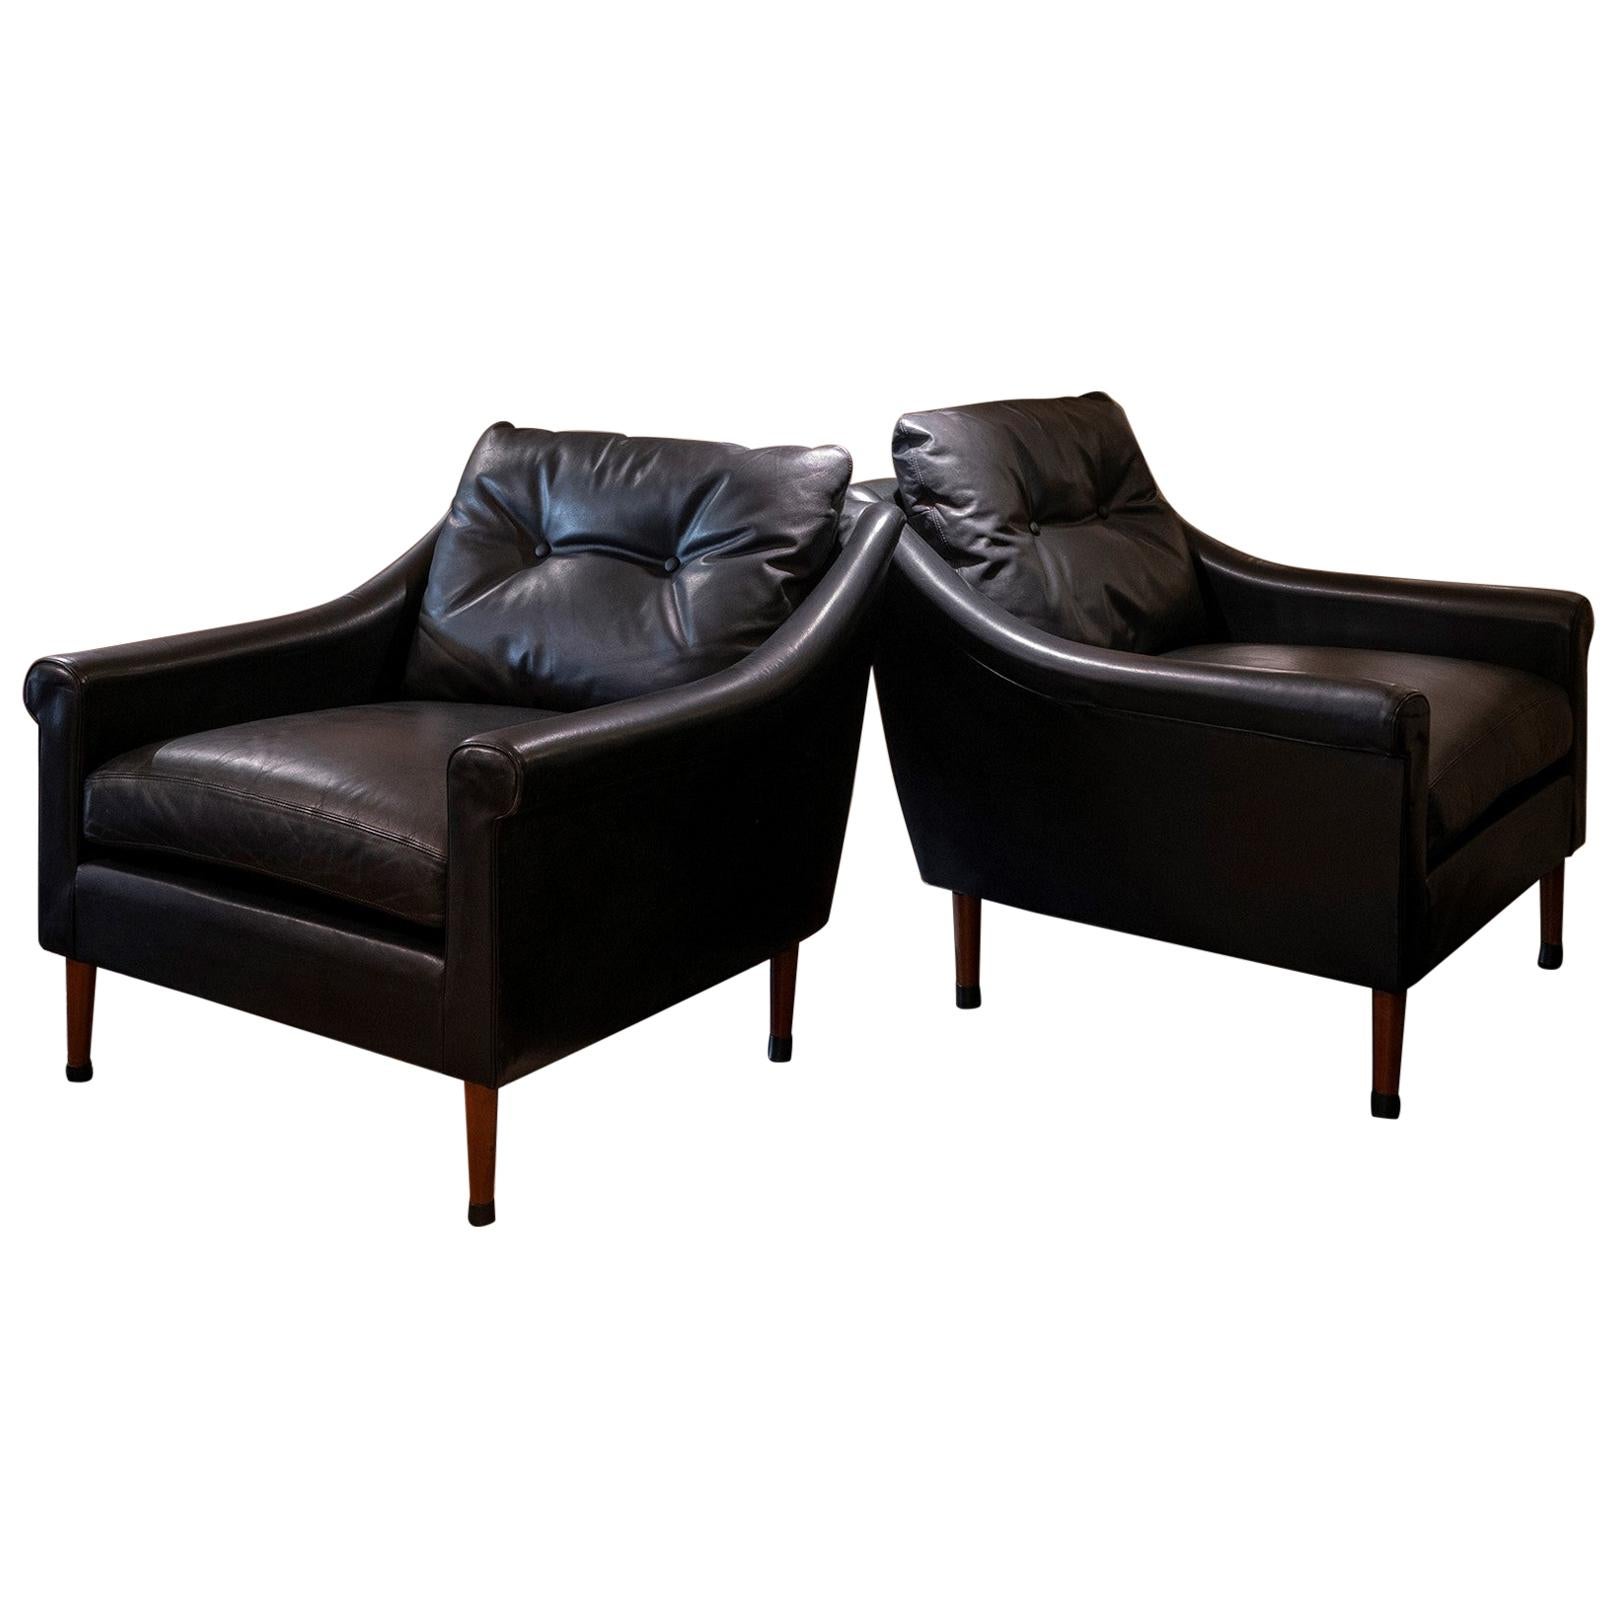 1950s French Mid-Century Modern Pair of Black Leather Armchairs